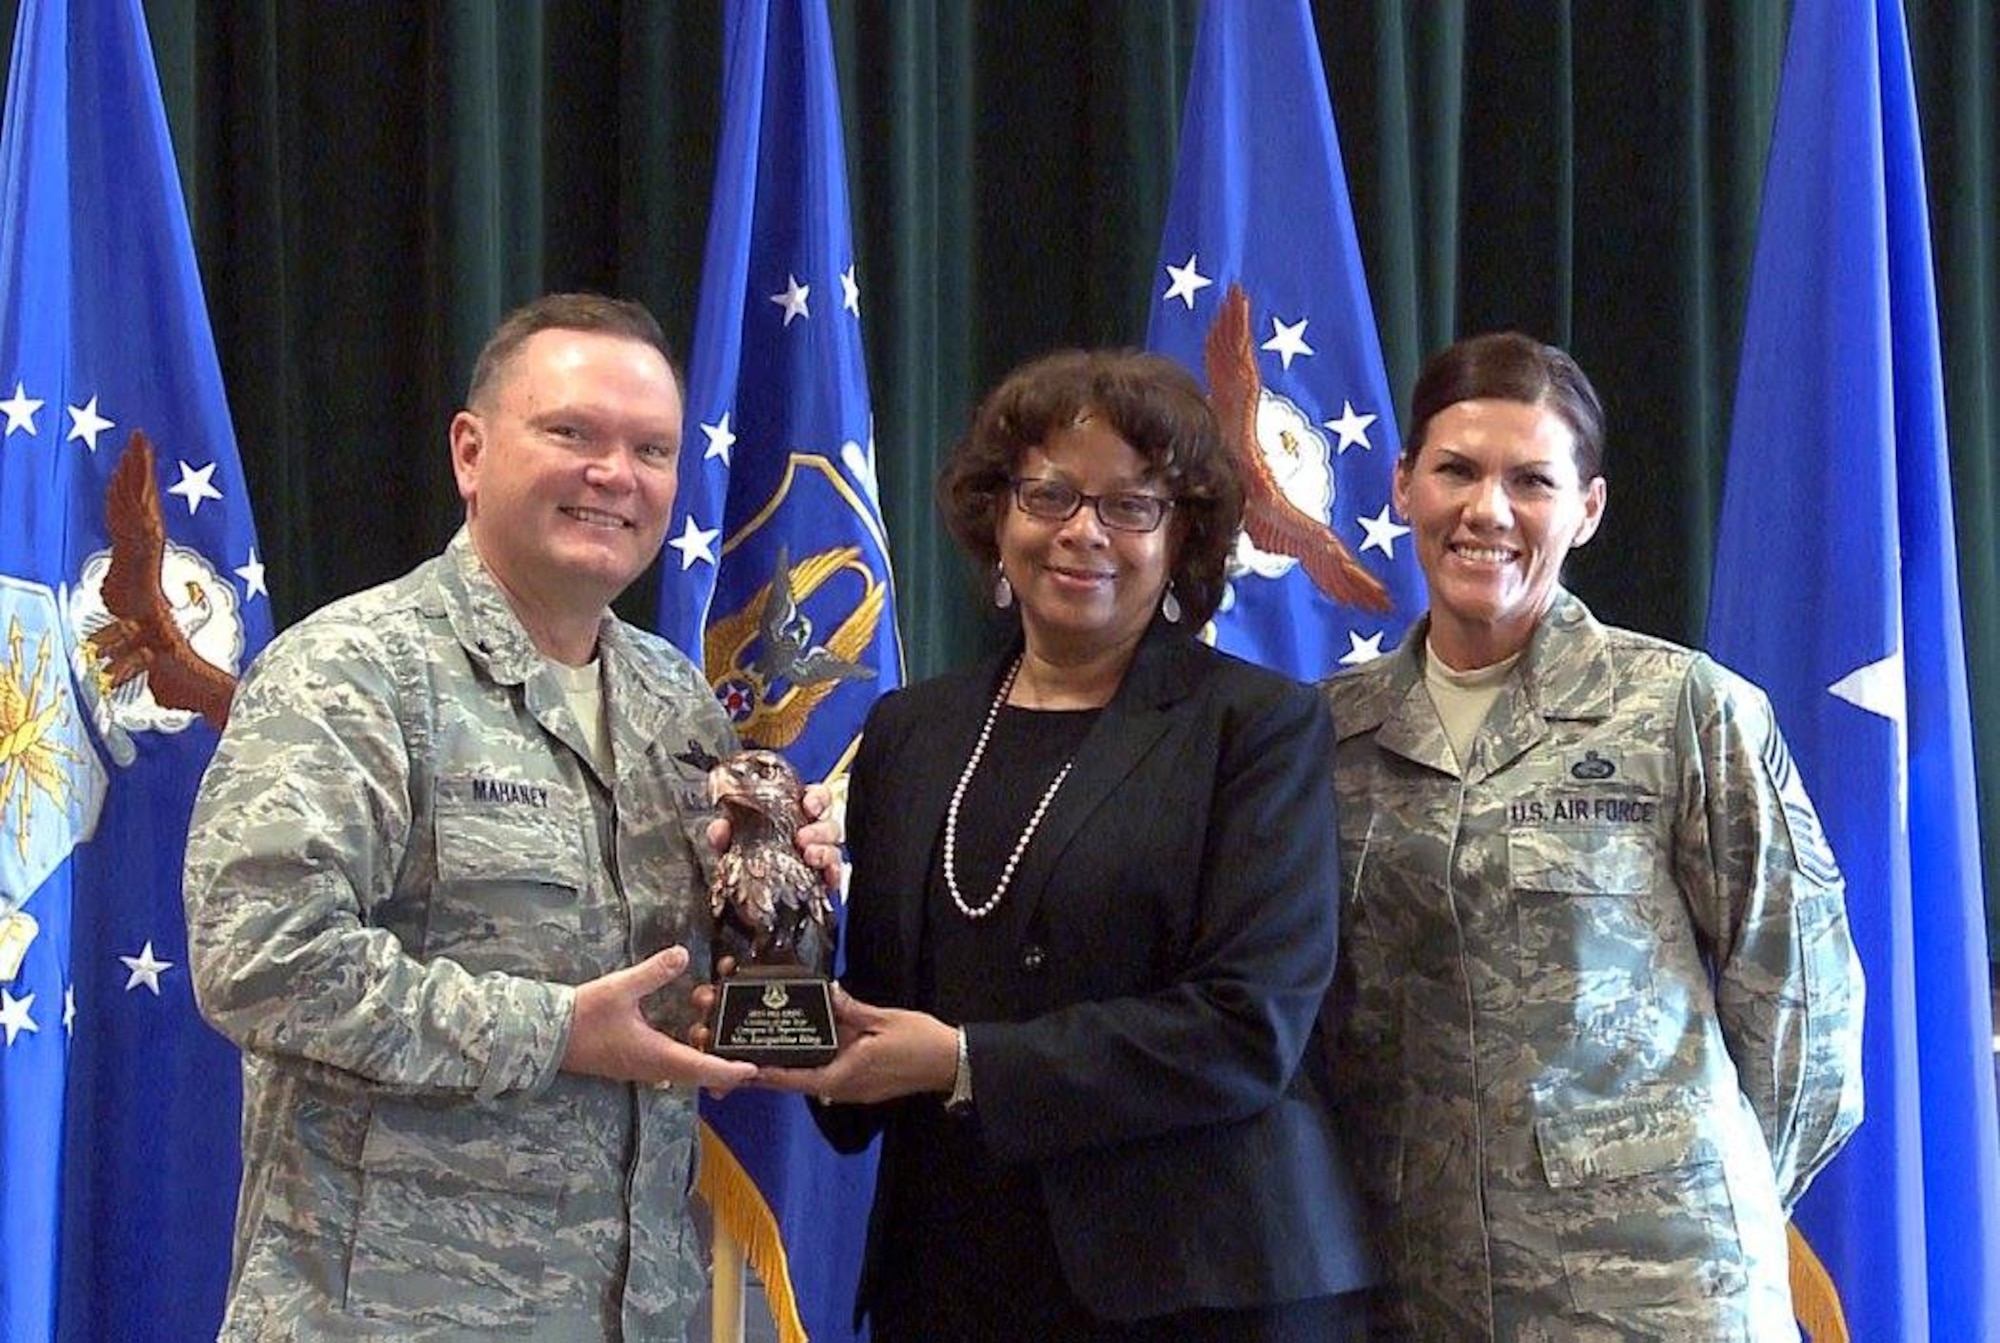 Brig. Gen. Samuel “Bo” Mahaney, Air Reserve Personnel Center commander, and Chief Master Sgt. Ruthe Flores, ARPC command chief, present the Category II, Supervisory Civilian of the Year award to Jacqueline Bing. Mahaney honored ARPC’s 2015 outstanding performers of the year Feb. 16, 2016, at the Heritage Eagle Bend Country Club in Aurora. Colo. (U.S. Air Force photo/Quinn Jacobson)